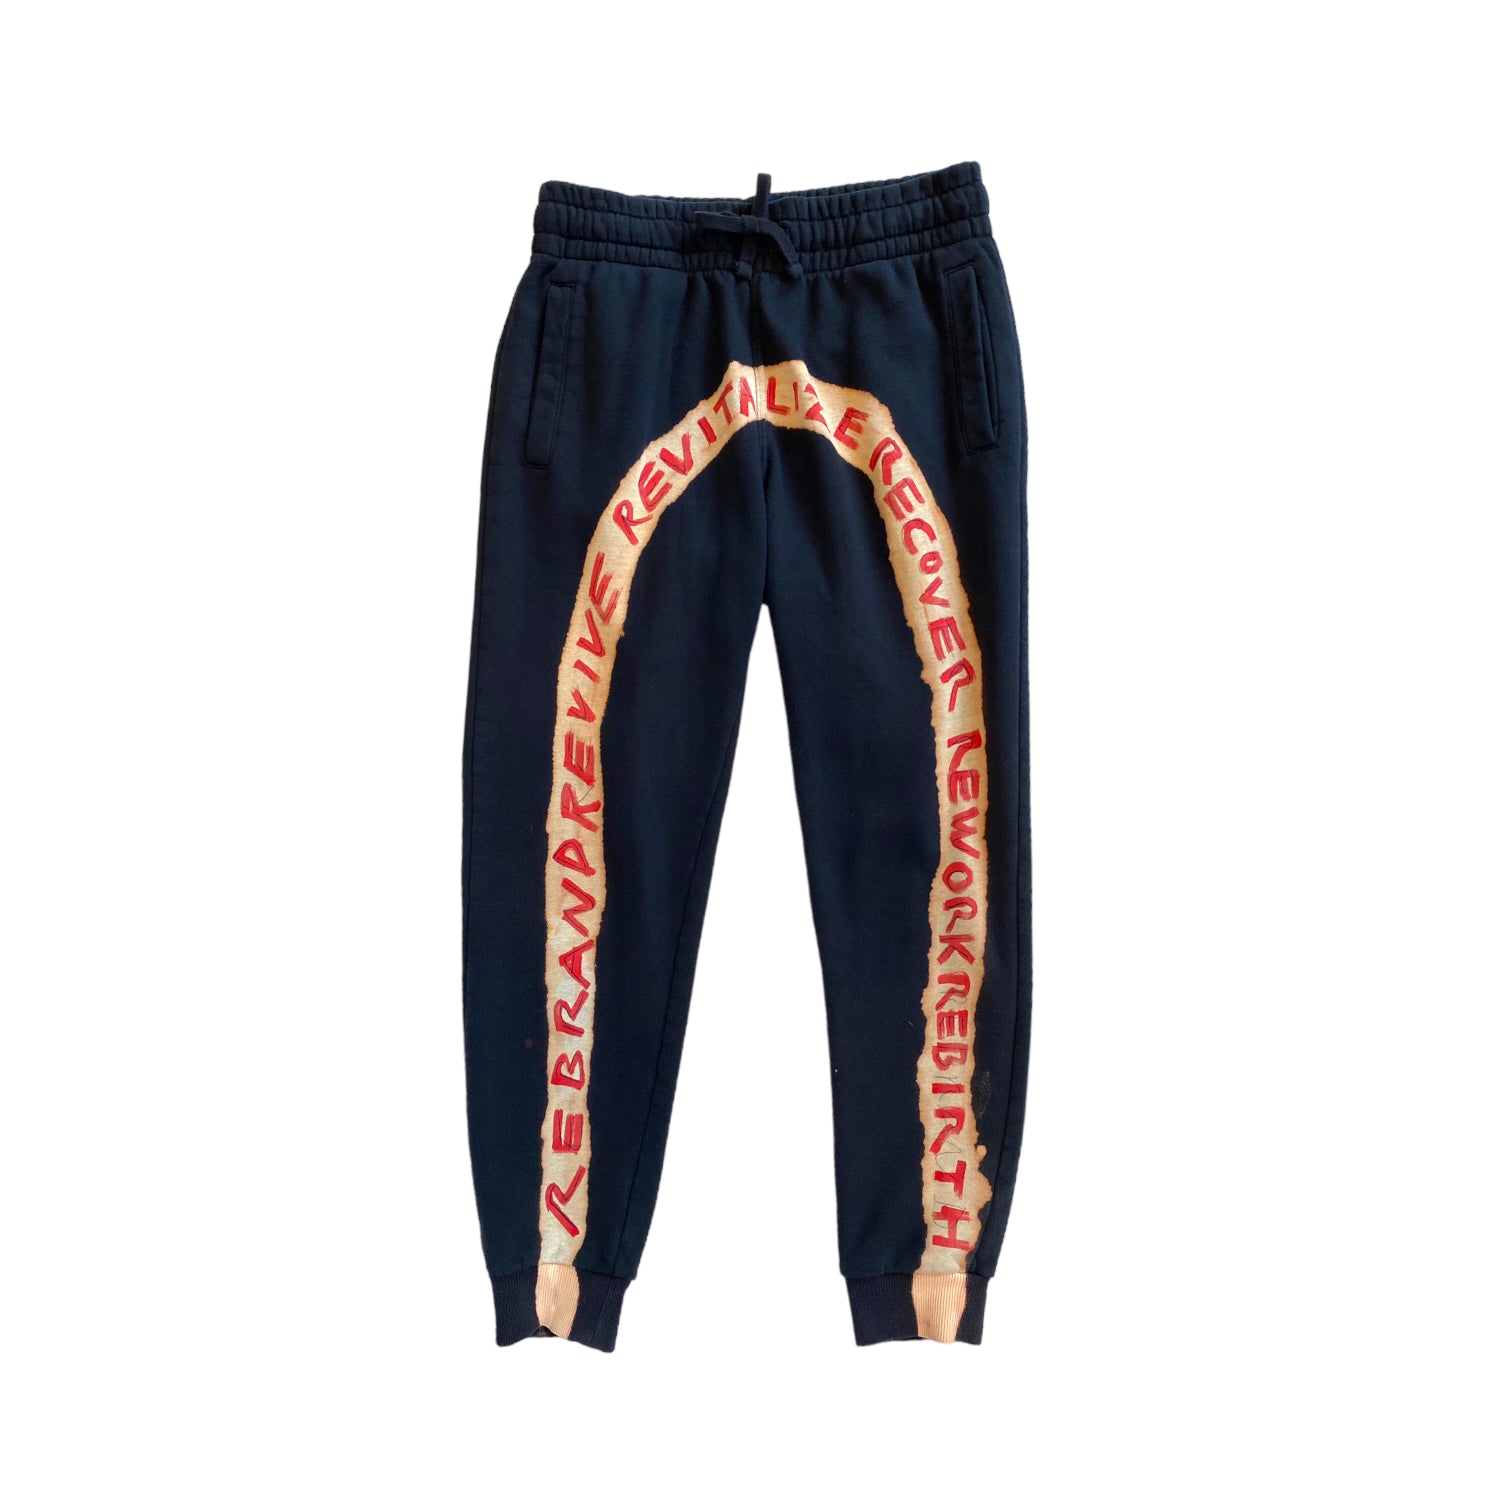 Black sweatpants with bleached arch and hand-painted red text across the front reading REBRAND REVIVE REVITALIZE RECOVER REWORK REBIRTH